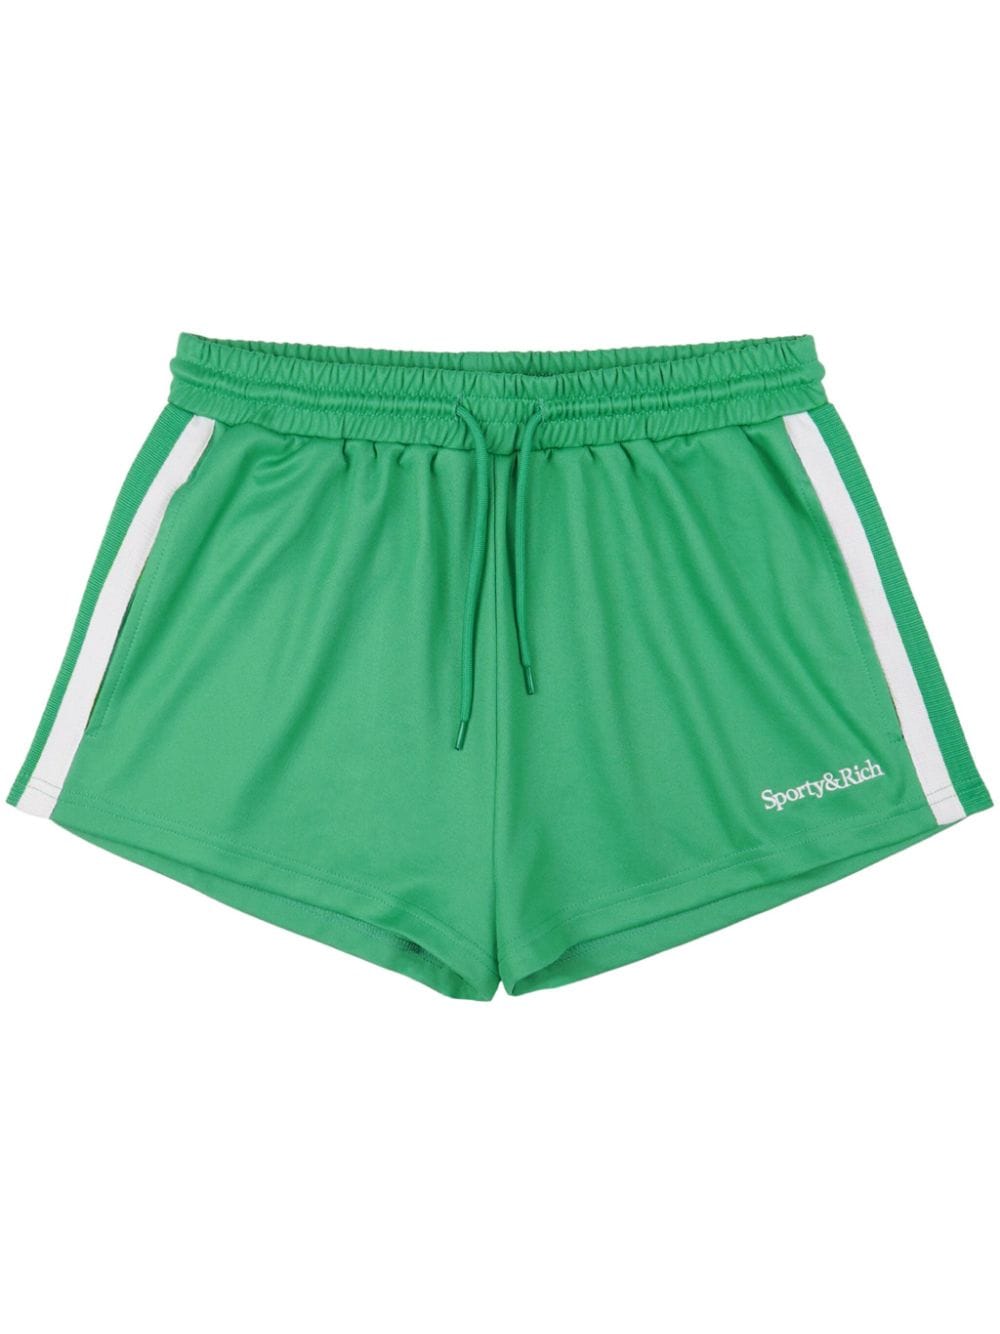 Sporty & Rich mid-rise track shorts - Green von Sporty & Rich